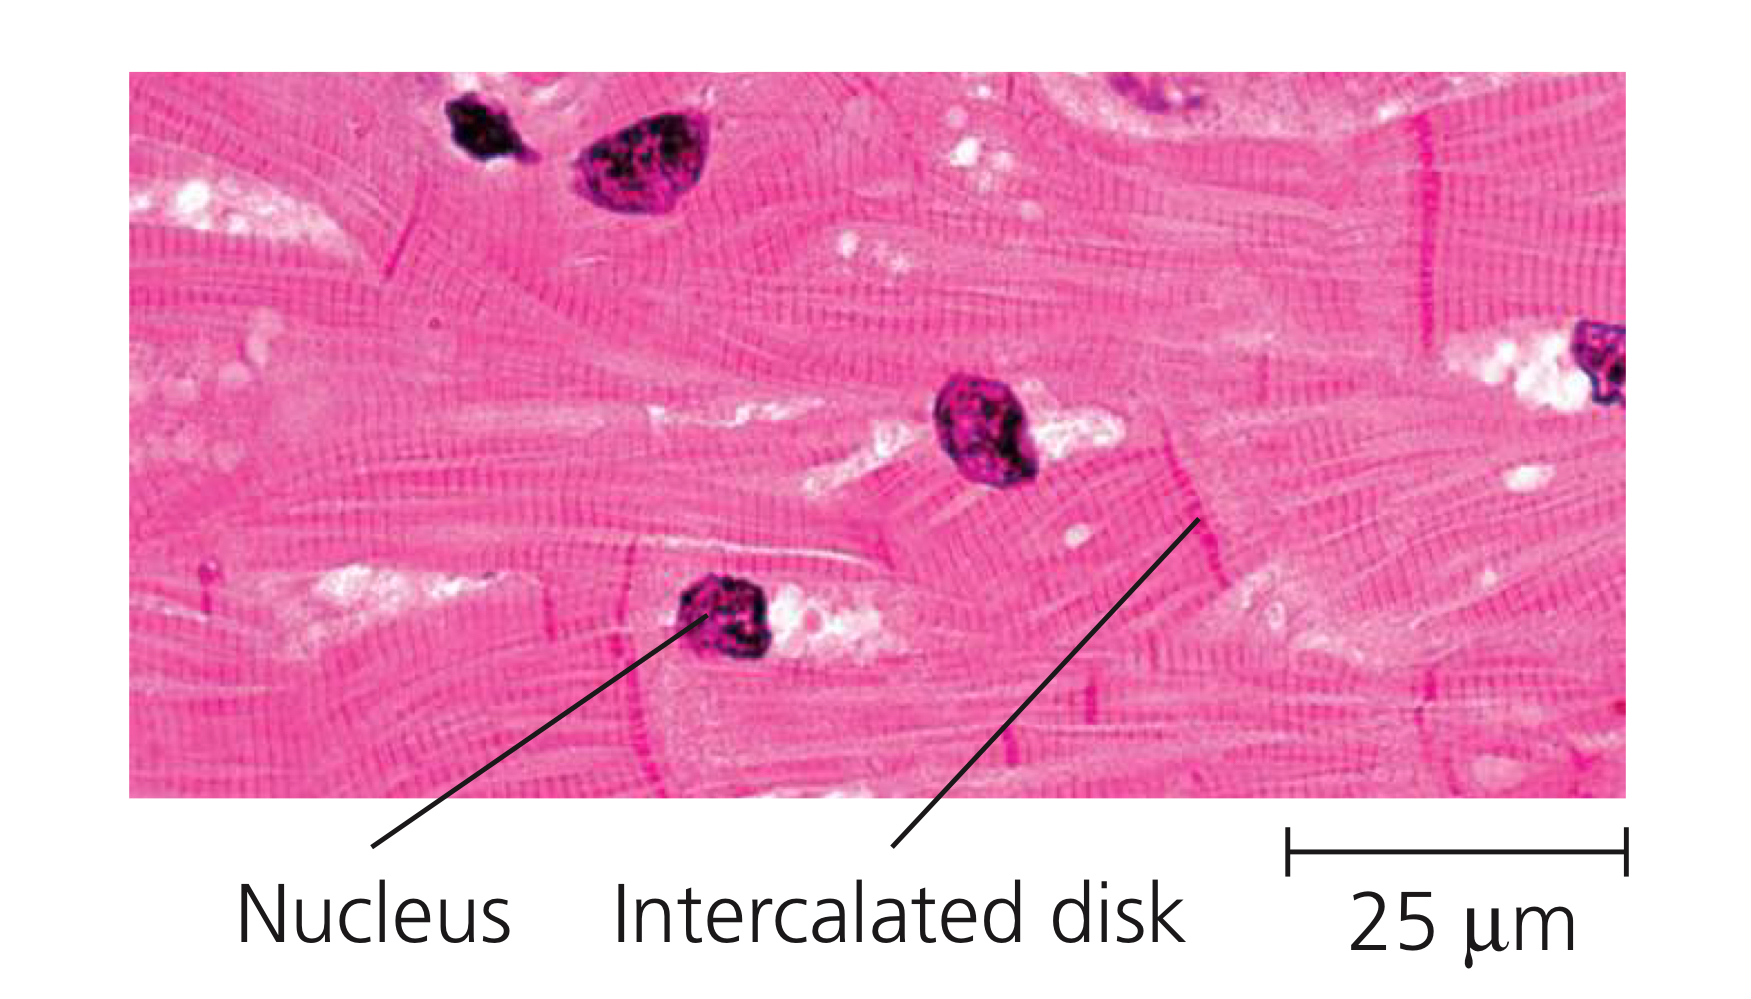 <p>Only in vertebrates, muscle composed of muscle fibres interconnected via intercalated disks, responsible for being the heart contractile wall, contracting the heart.</p><p><em>A good indicator is the branched fibre appearance.</em></p>